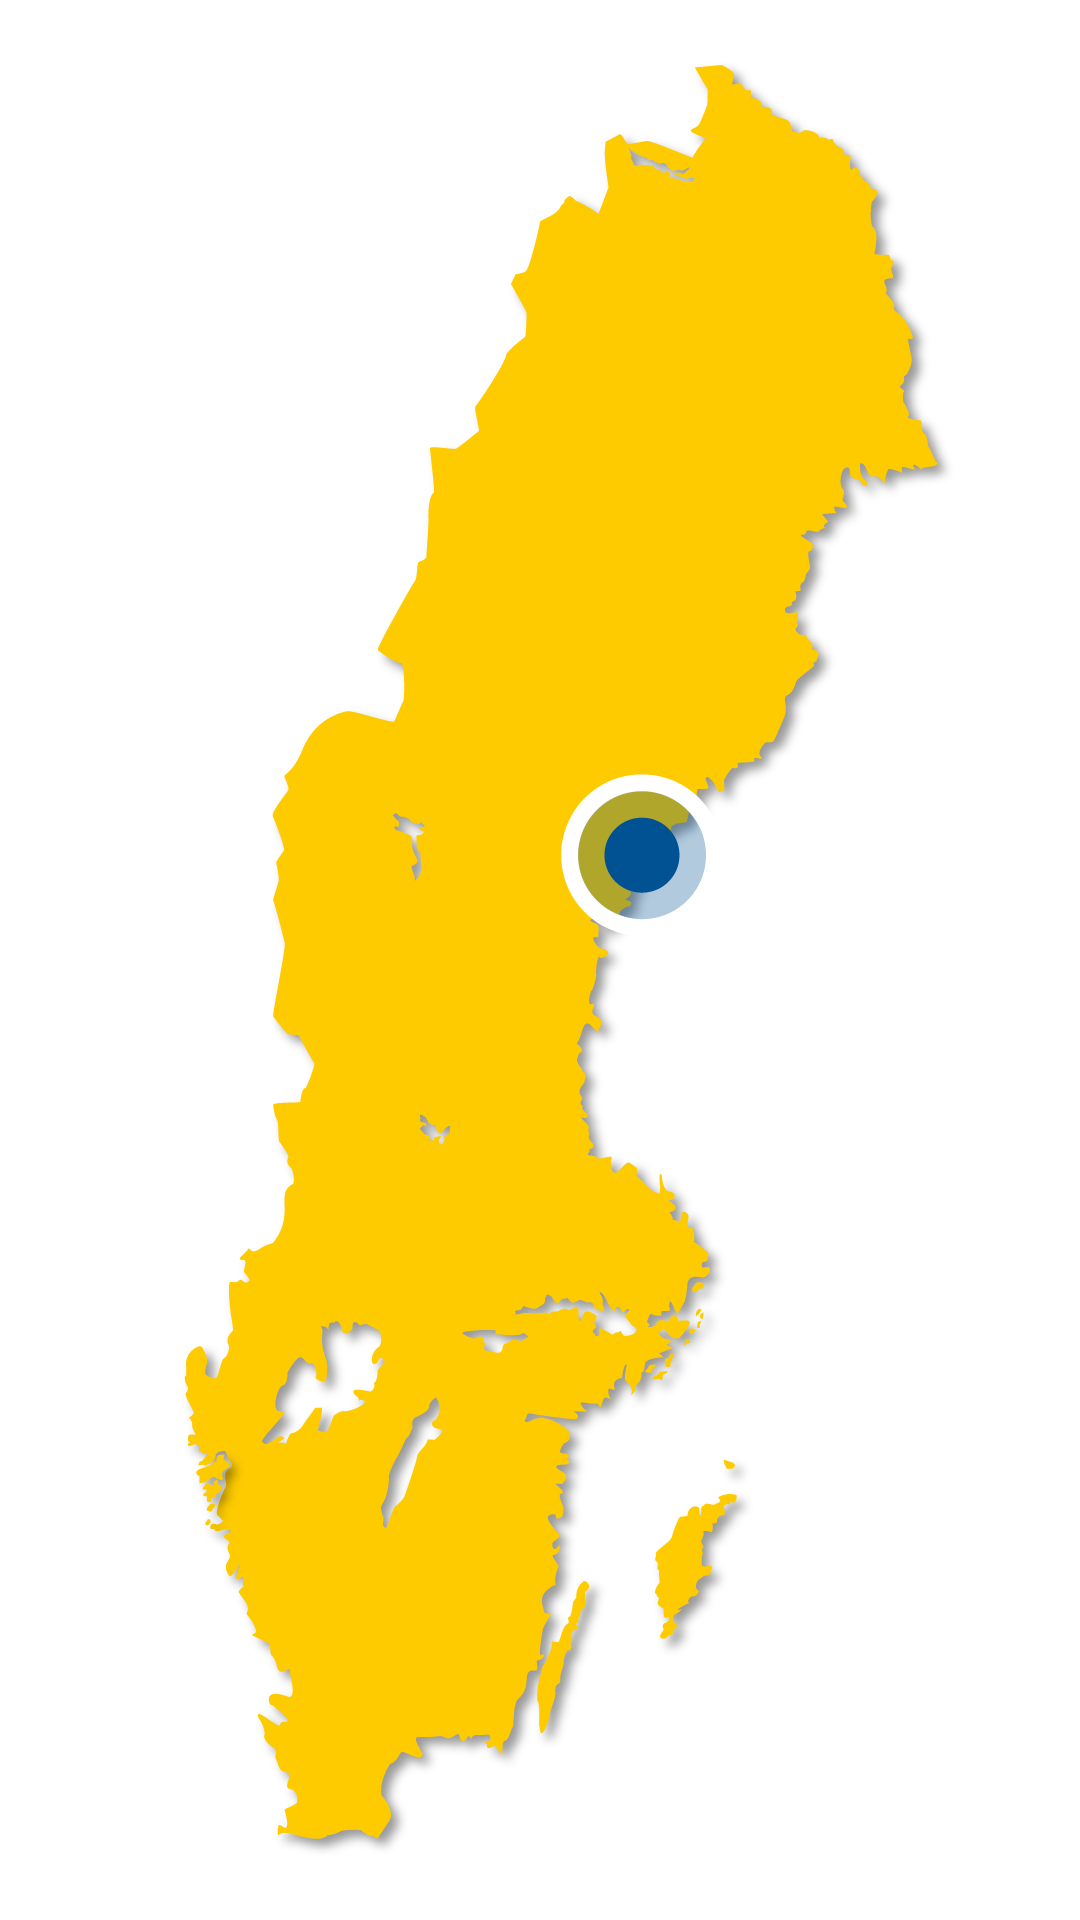 The High Coast is situated in the north-eastern part of Sweden